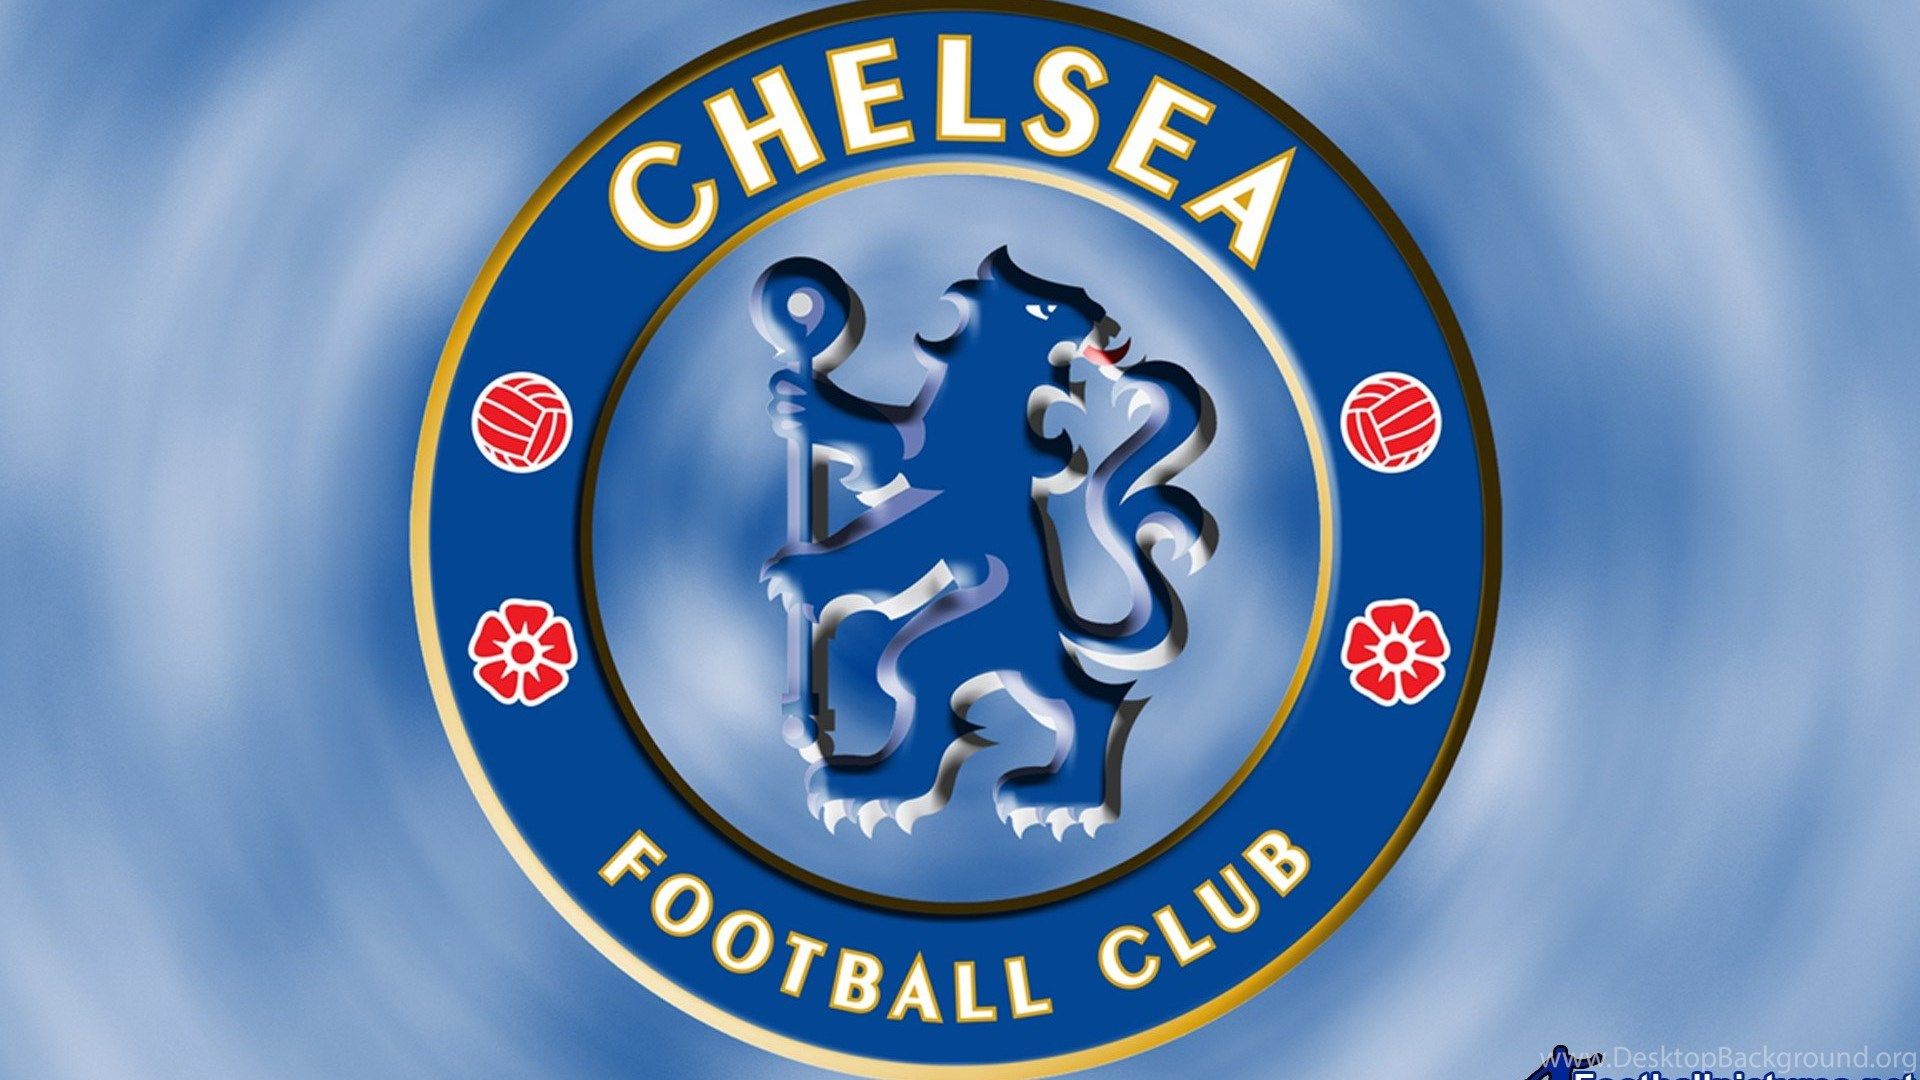 Chelsea Logo 3D Wallpaper, Football Picture And Photo Desktop Background